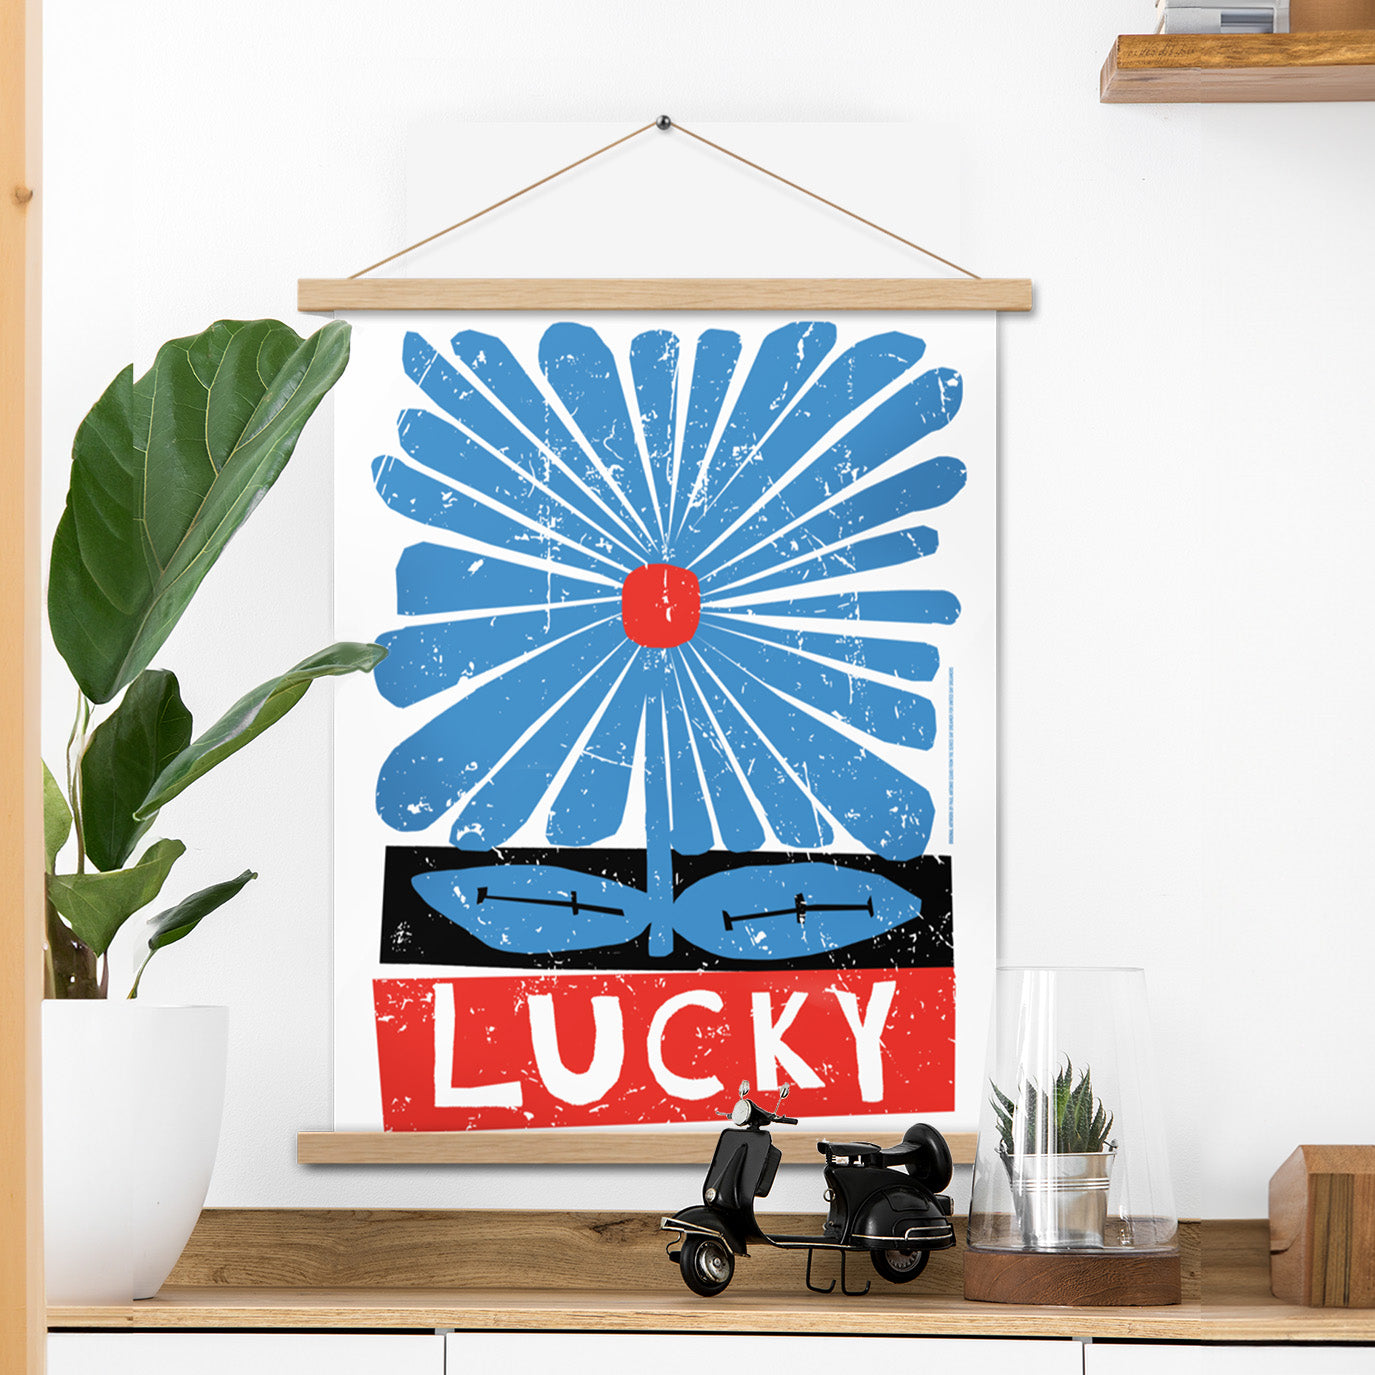 Lucky Wall Poster Decoration By Paul Antonio Szabo